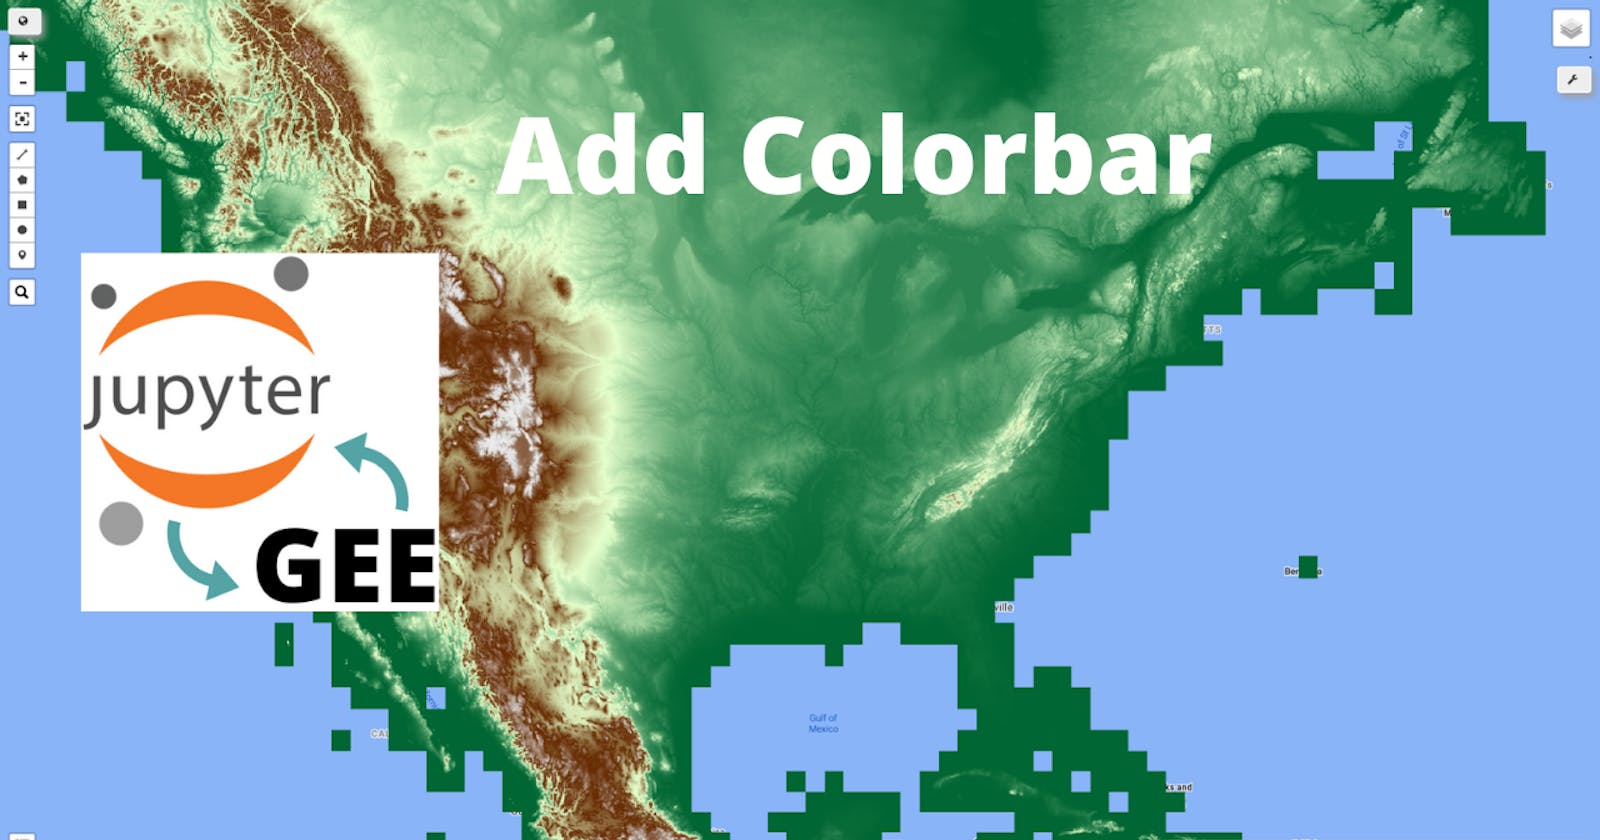 GEE Tutorial #49 - How to add a colorbar to the map